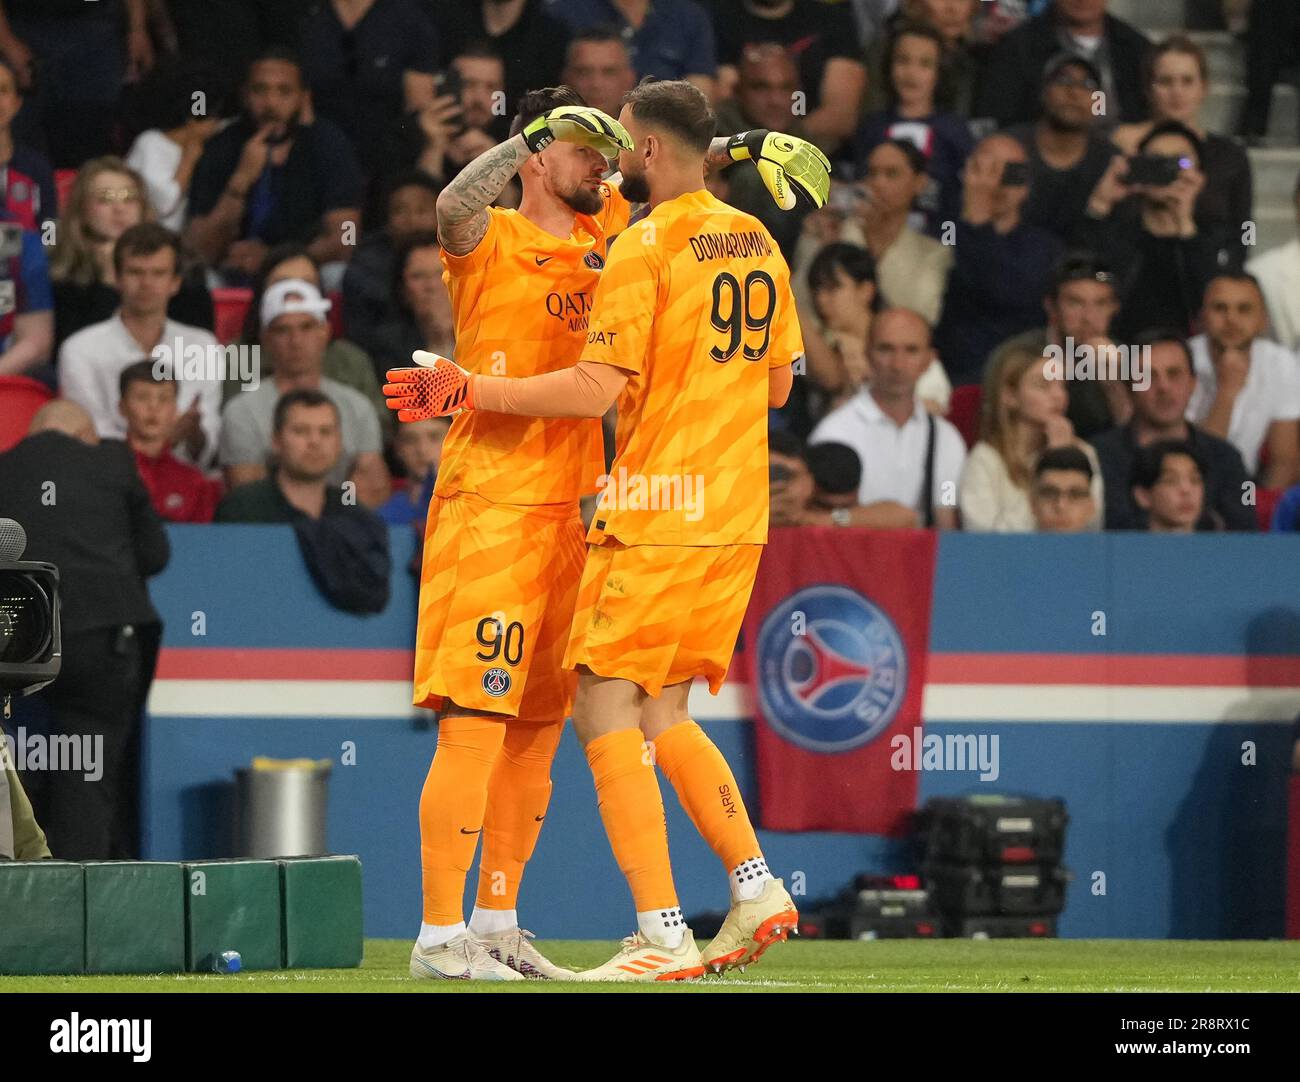 Goalkeeper Alexandre Letellier of PSG replaces Goalkeeper Gianluigi Donnarumma of PSG during the Ligue 1 match between Paris Saint Germain and Clermon Stock Photo